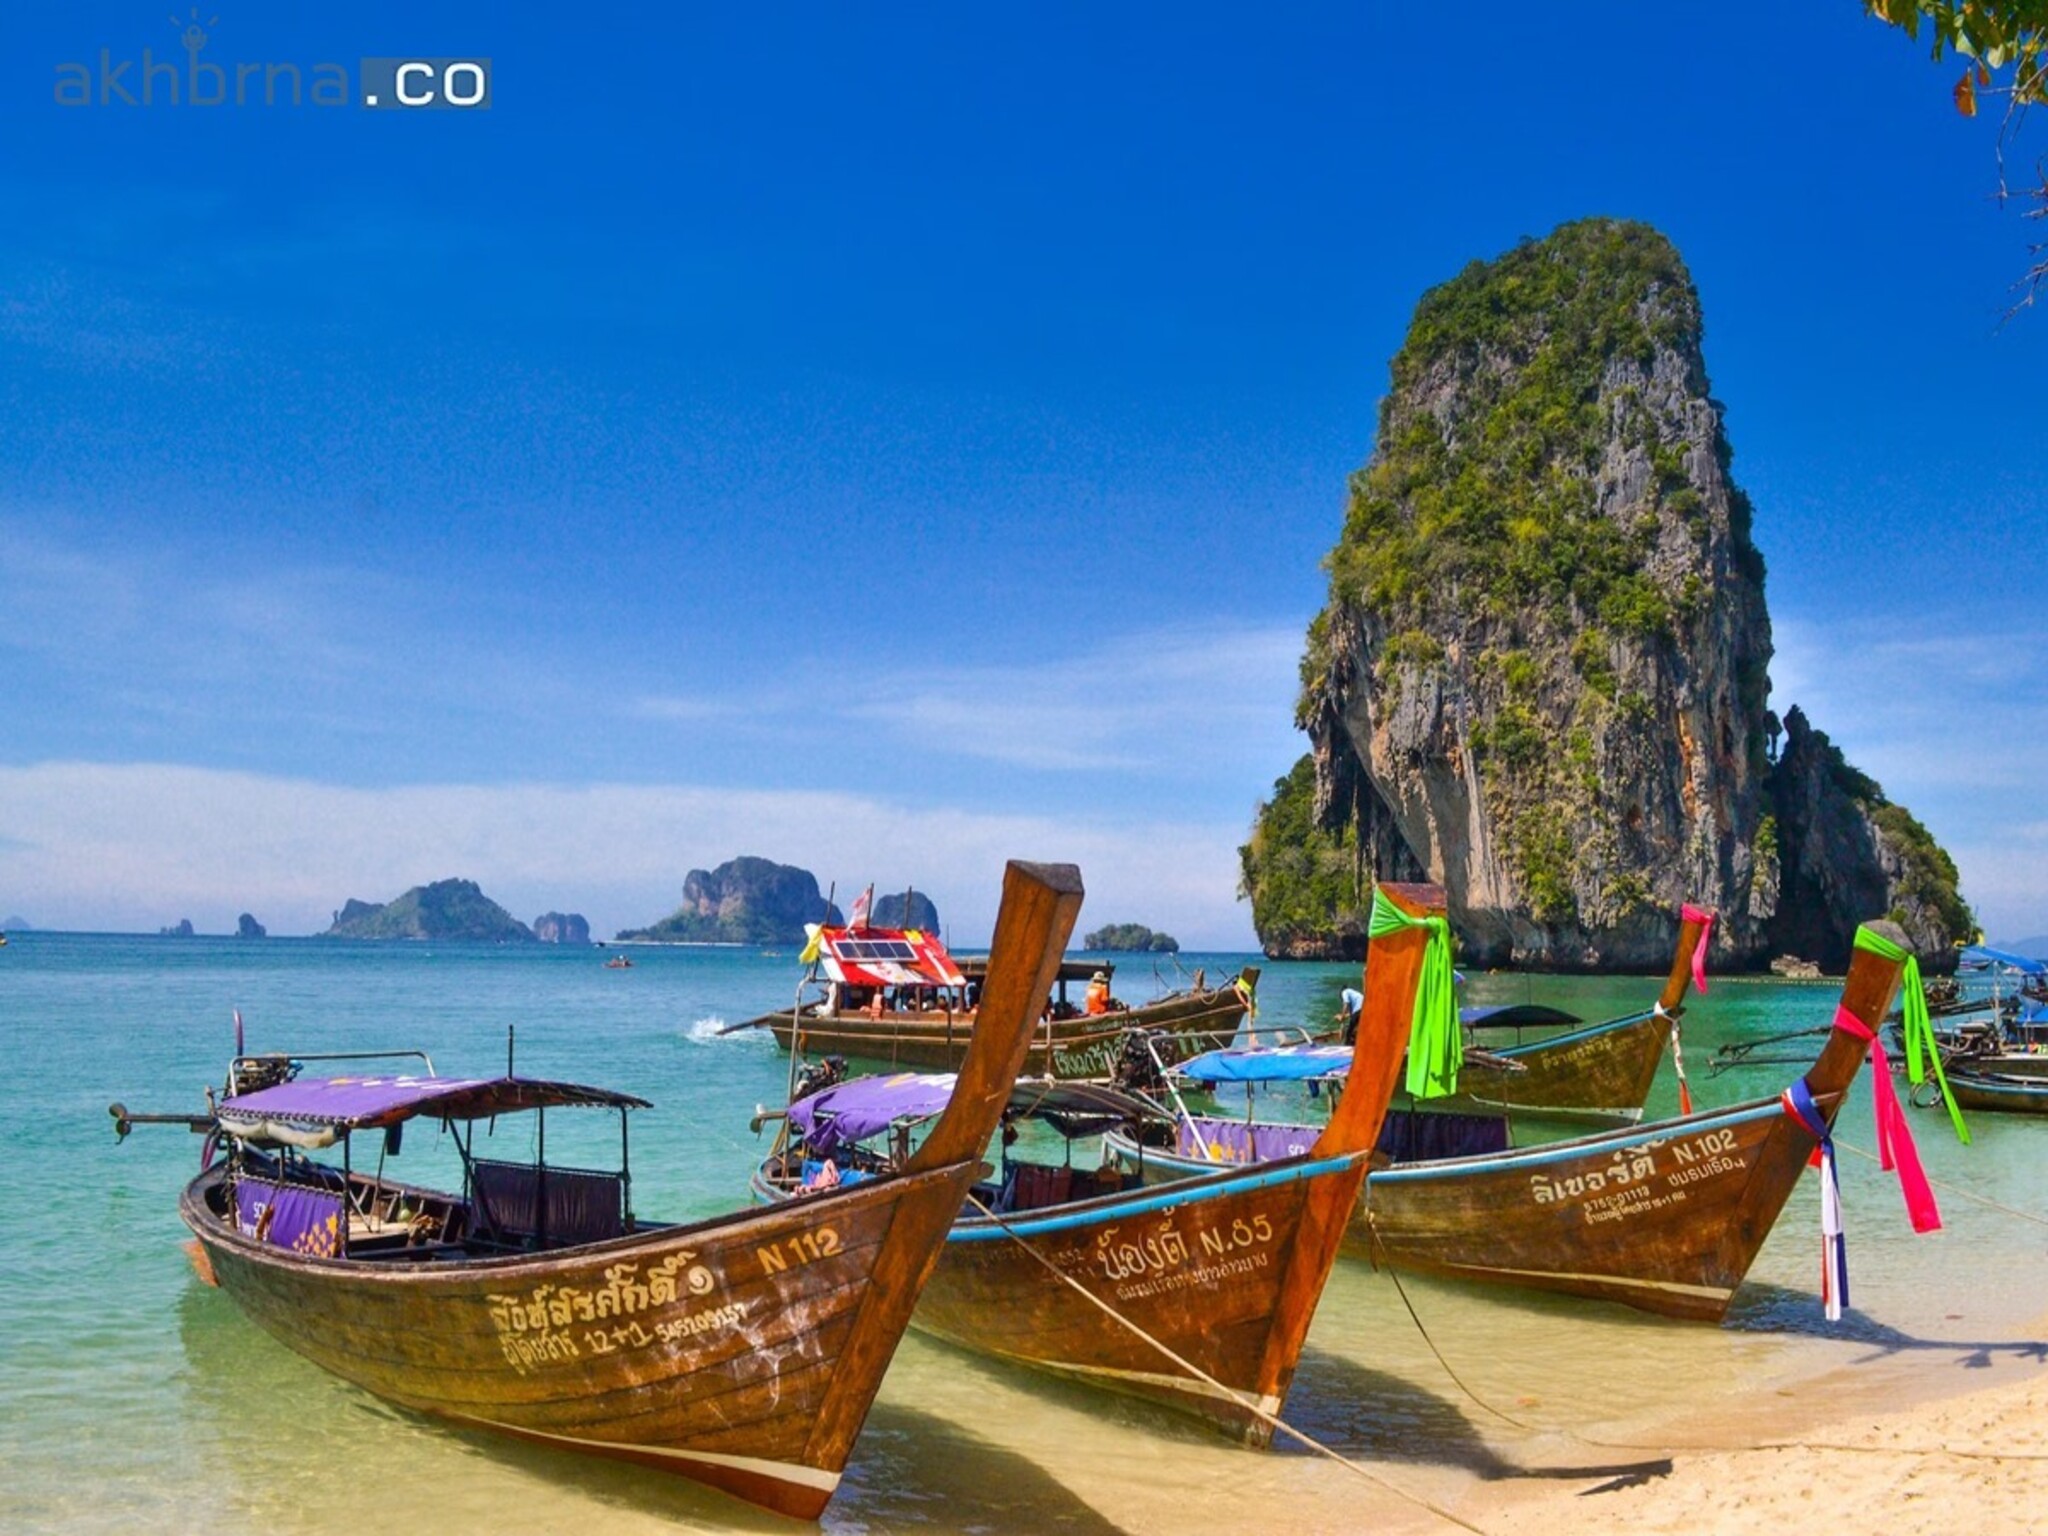 Thailand extends visa stays for tourists, students, digital nomads